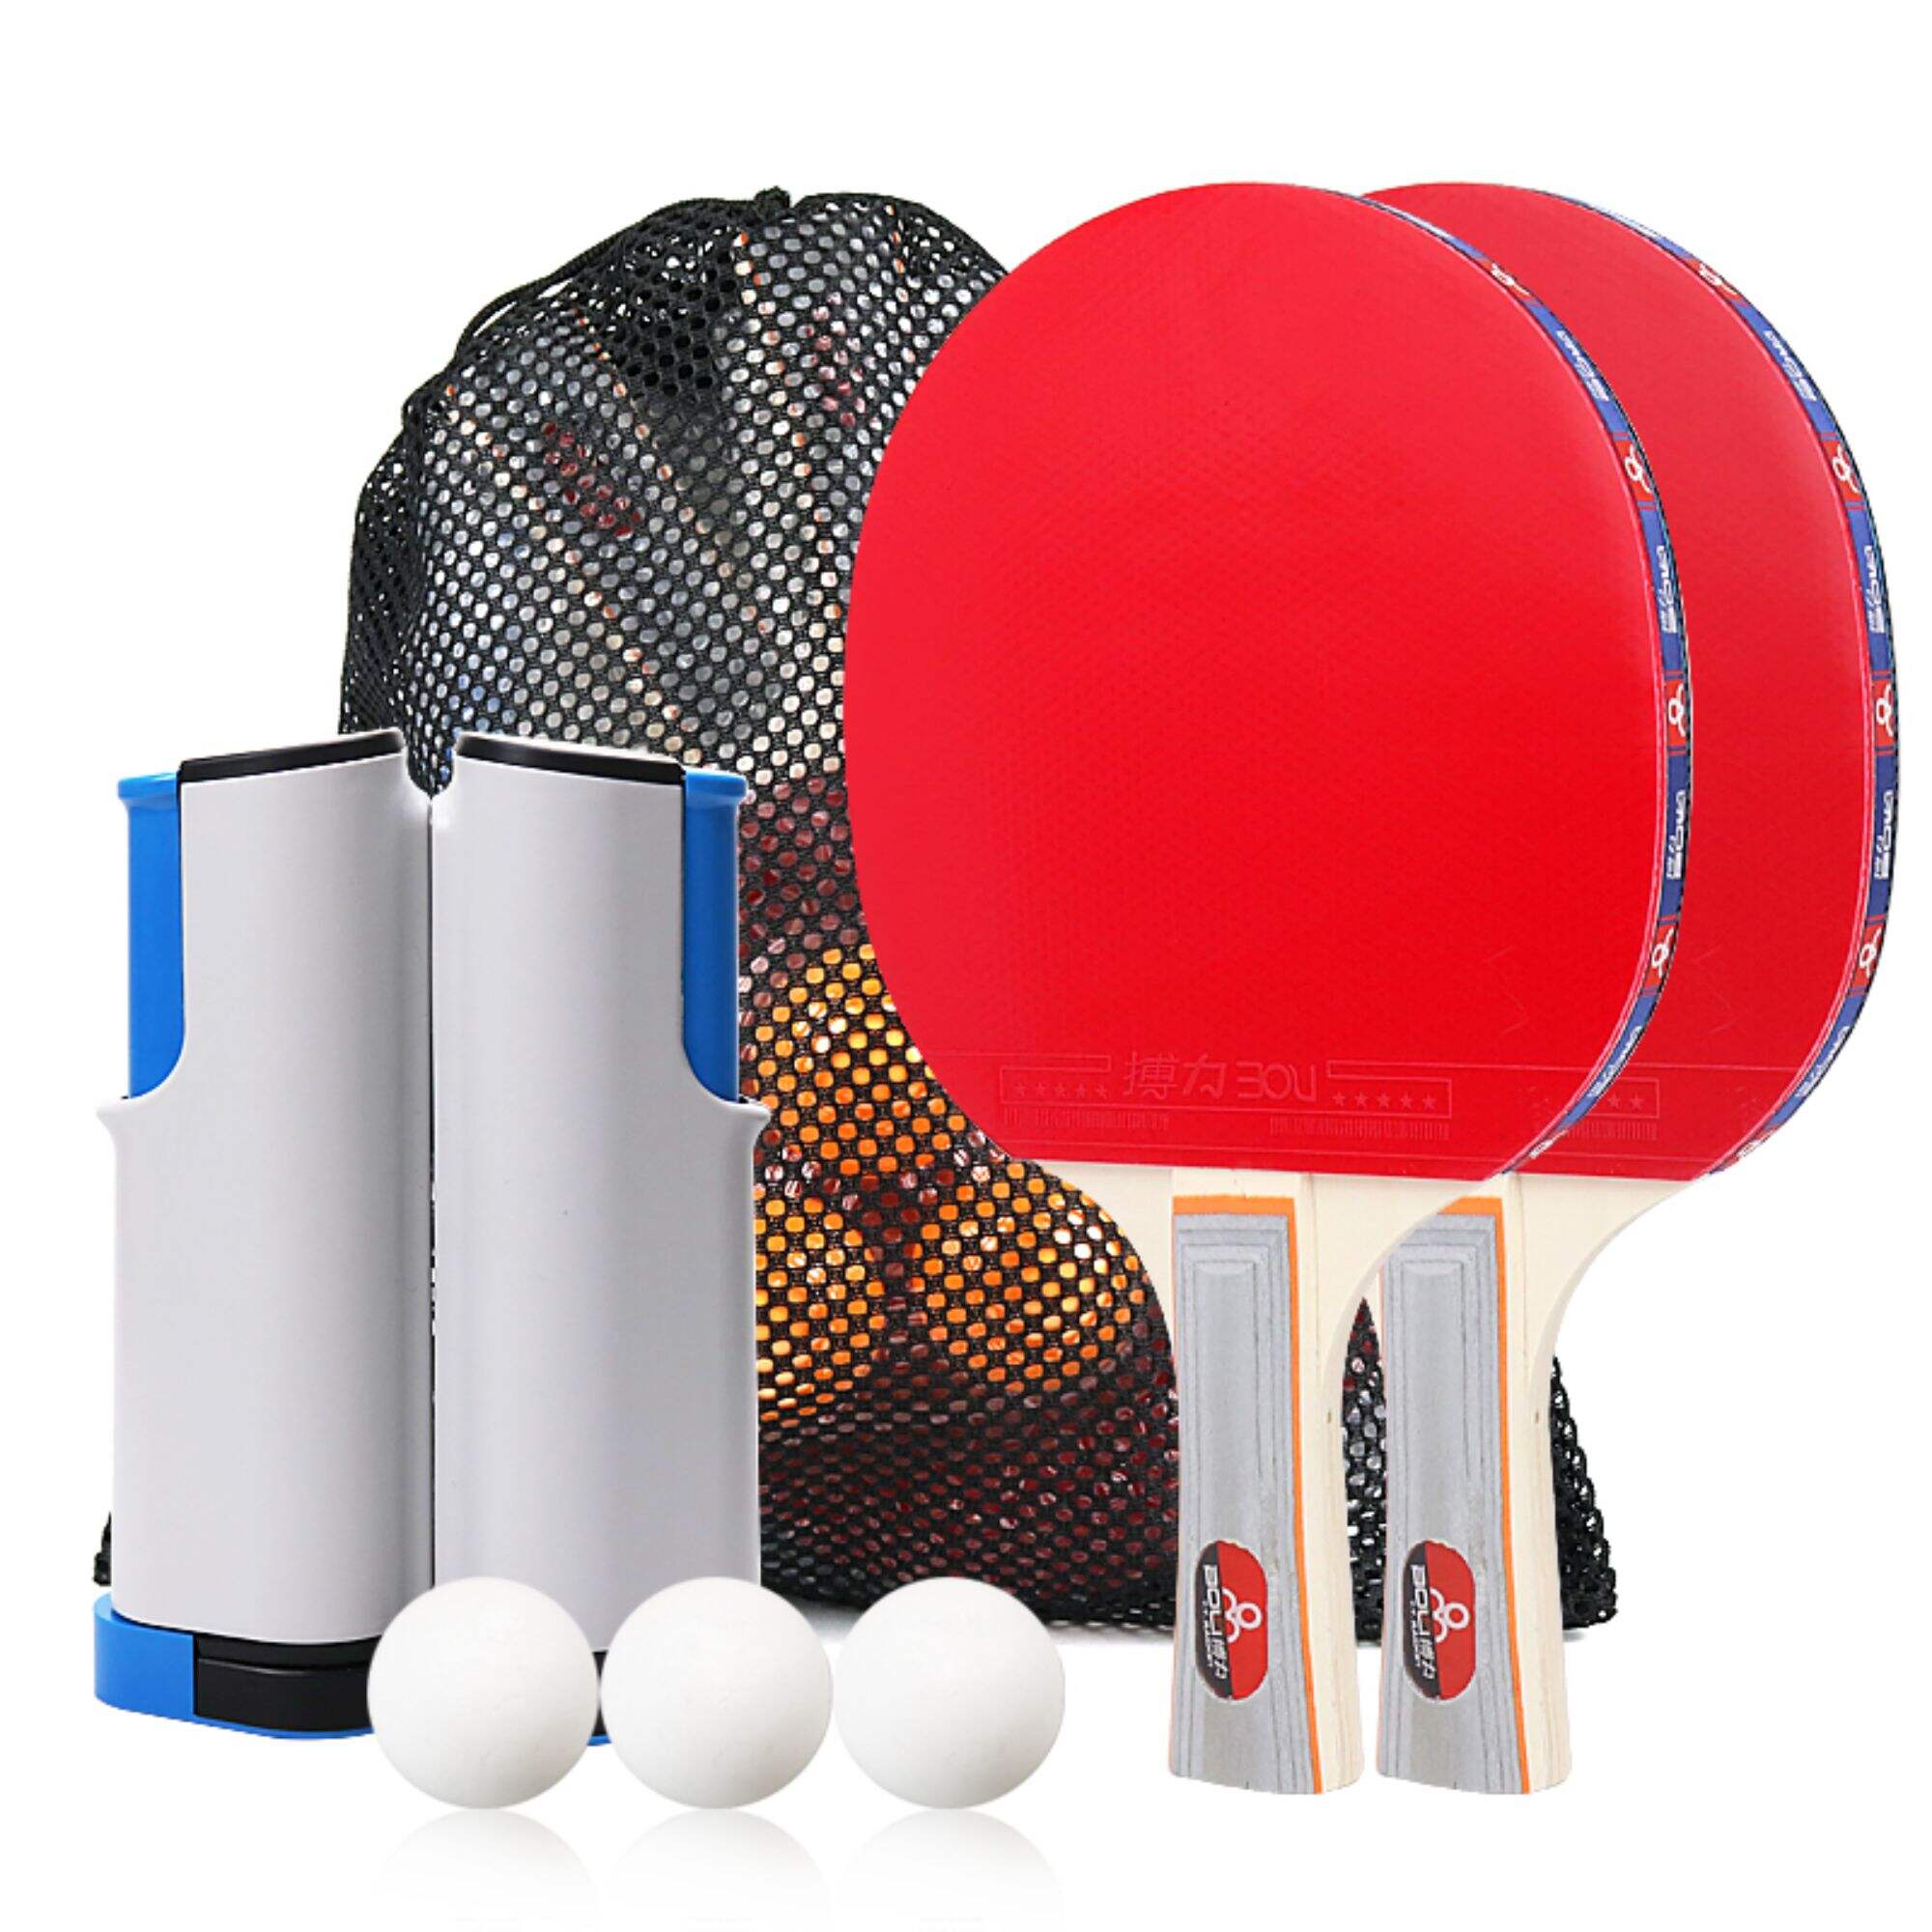 T04 Boli Long Handle Table Tennis Racket Set With 3 ABS Balls And A Net